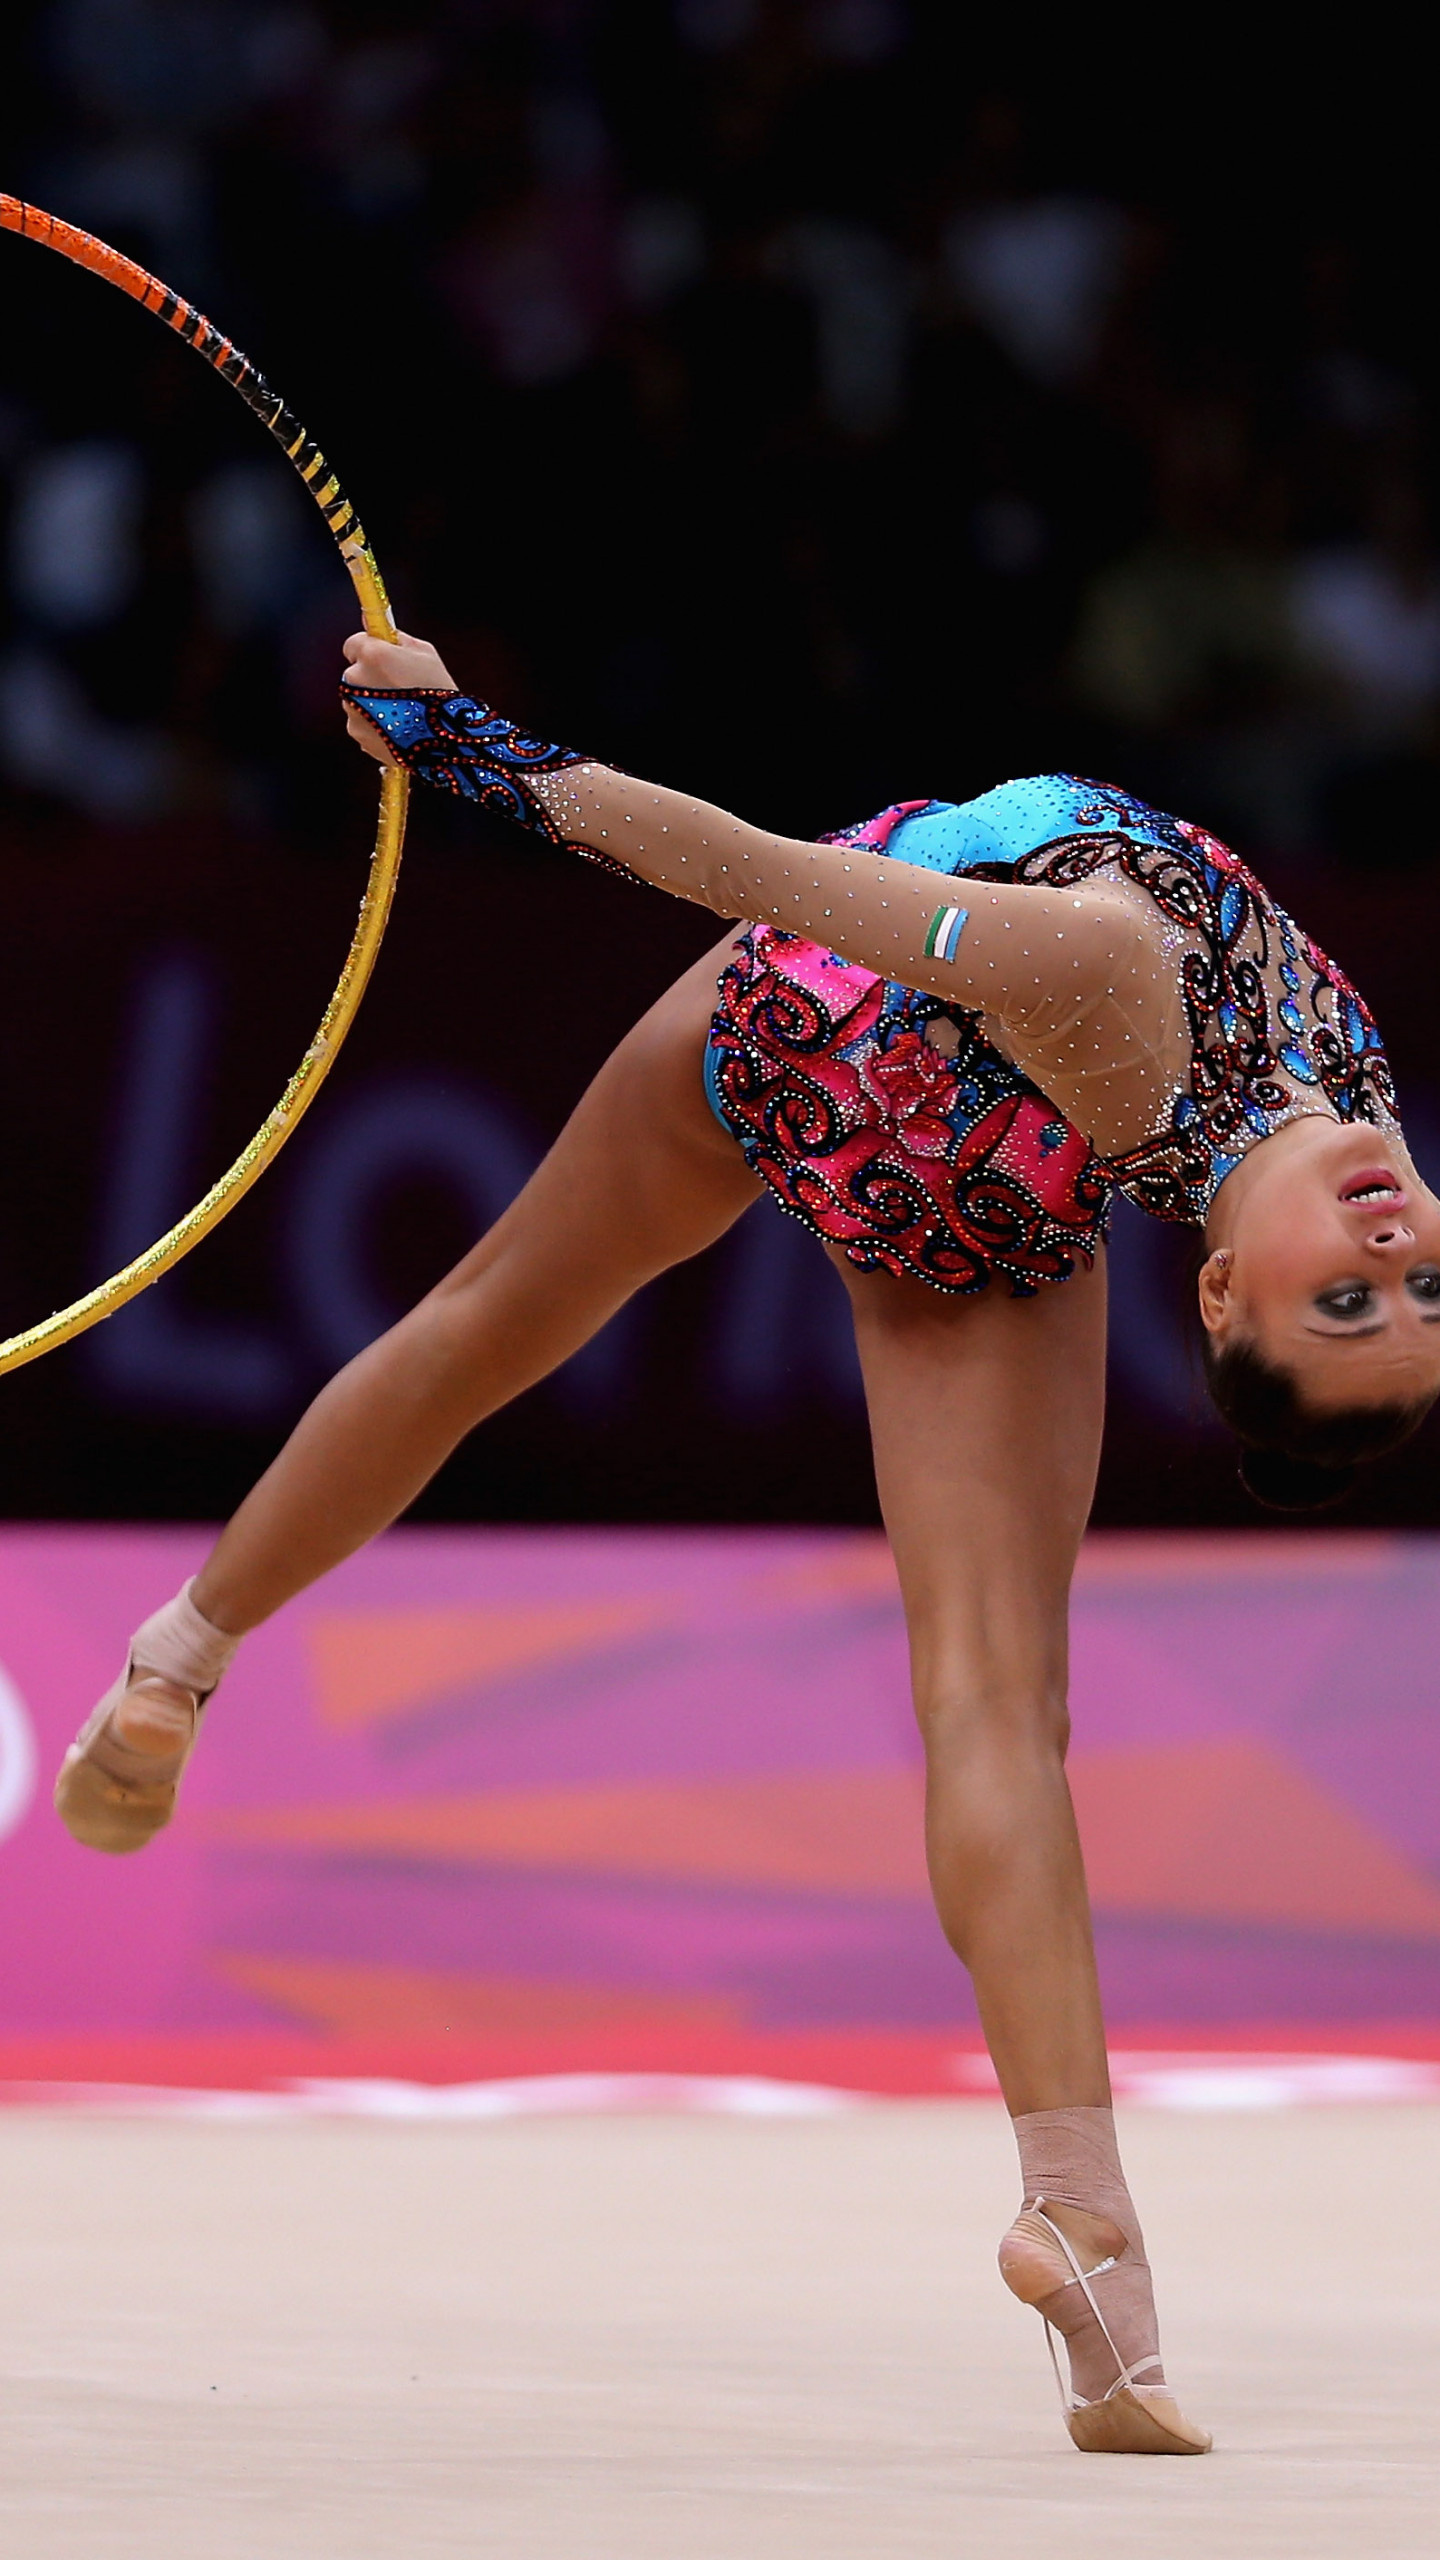 Rhythmic gymnastics spectacle, Widescreen wallpaper, Athletic feat, Dynamic imagery, 1440x2560 HD Phone